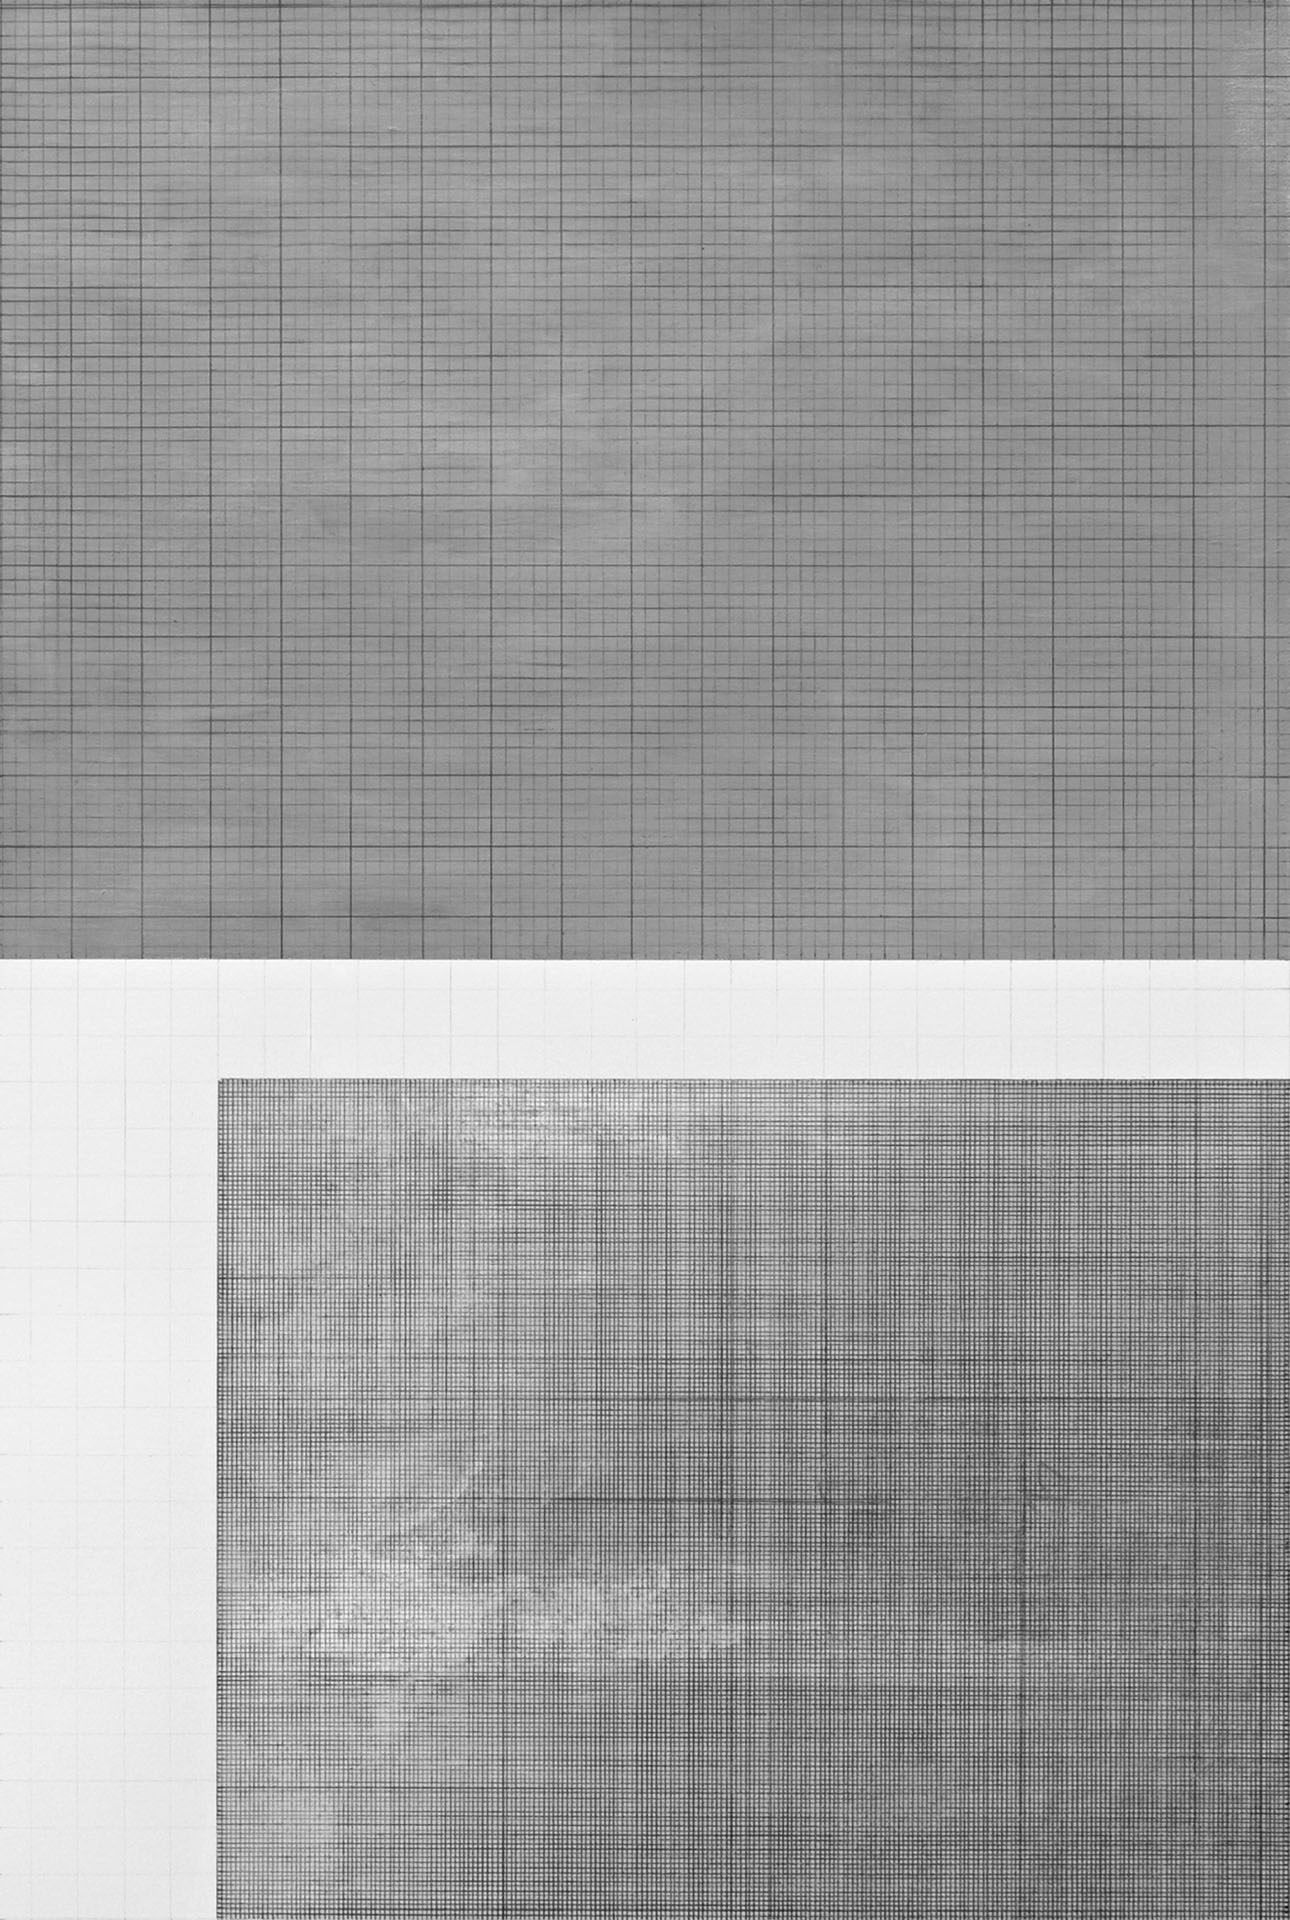  Grid 2, 2009, acrylic and graphite on bristol board, 410 x 276mm, private collection 